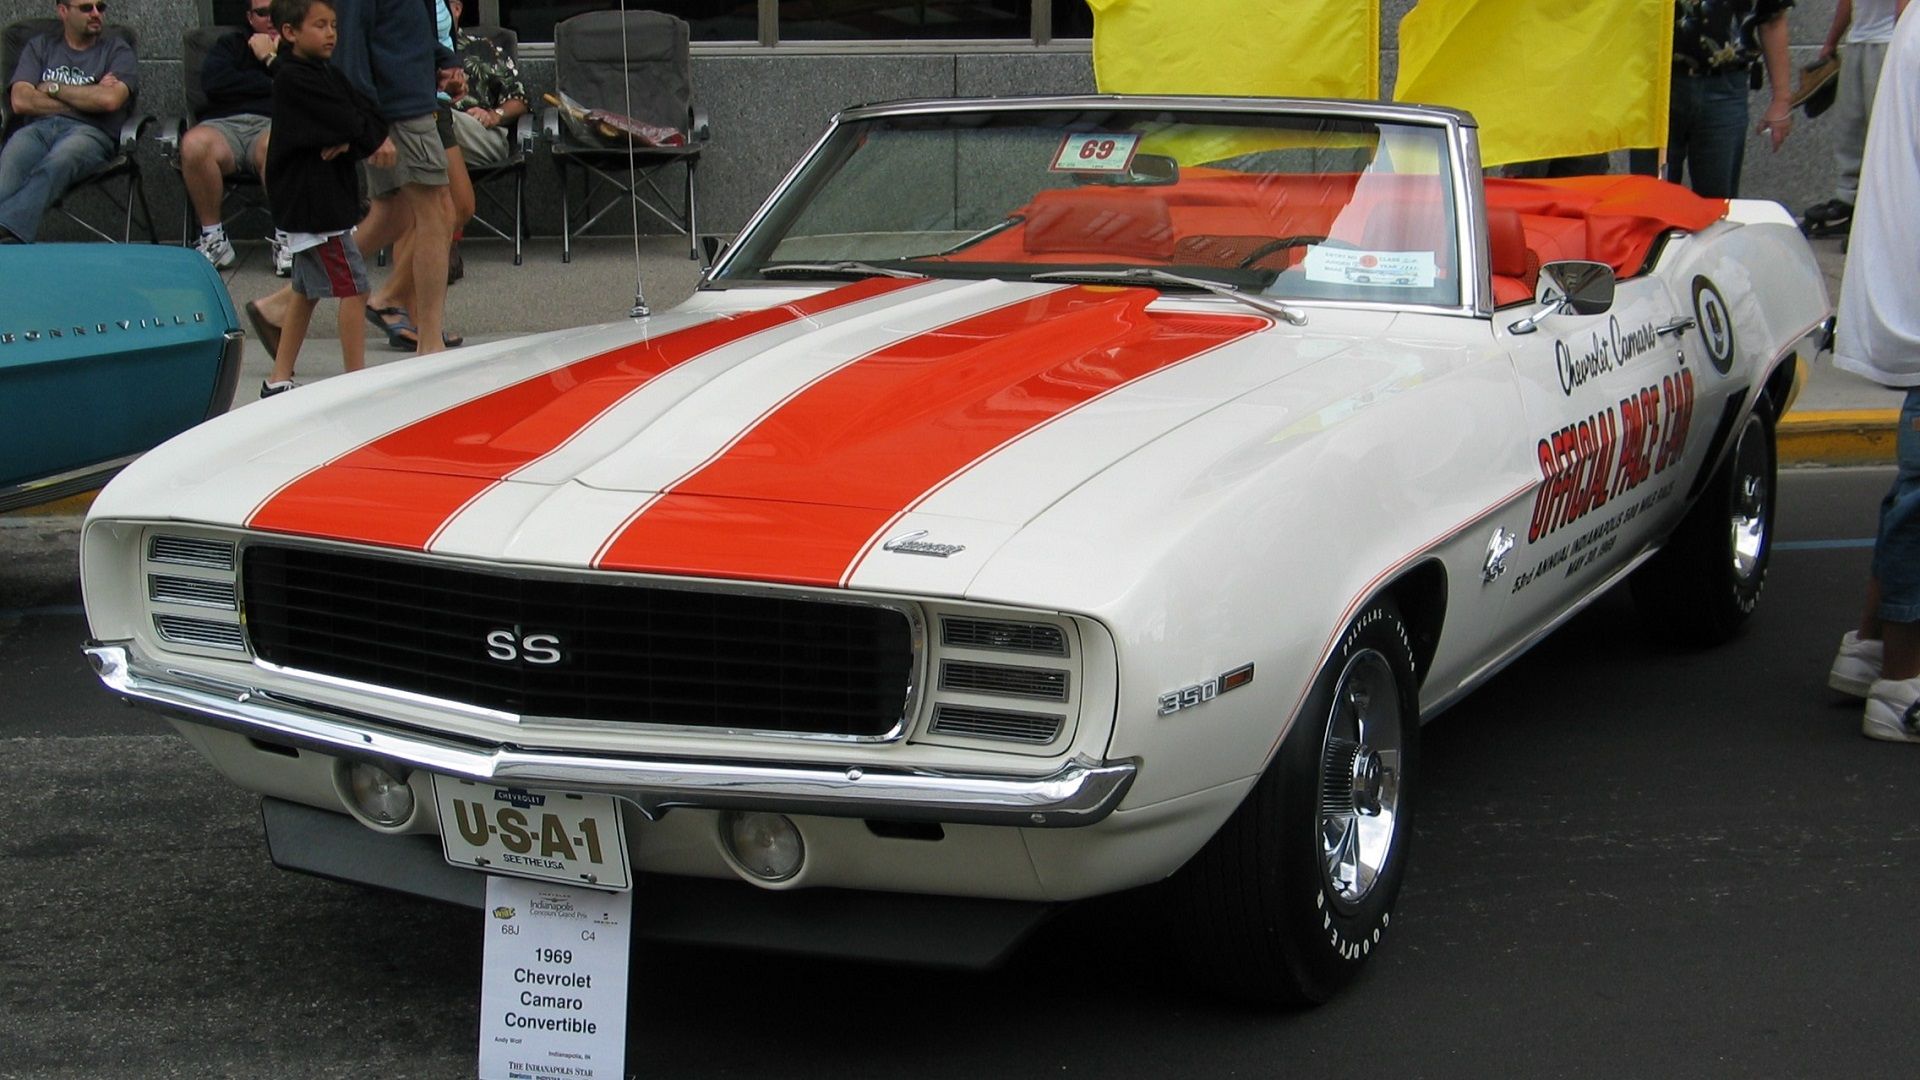 A parked 1969 Chevrolet Camaro SS Pace Car on display